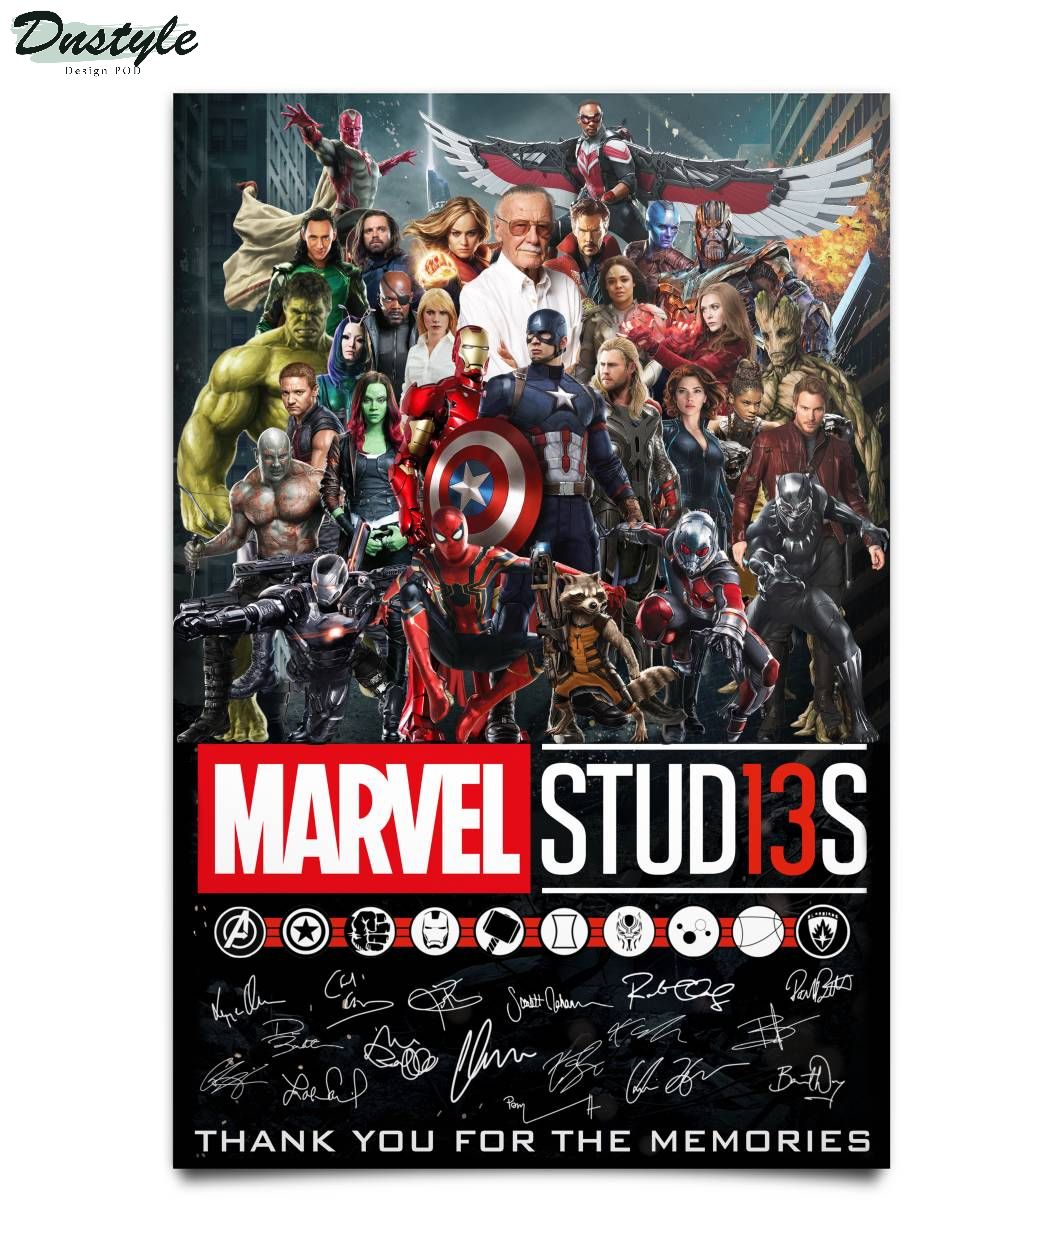 Marvel stud13s signature thank you for the memories poster